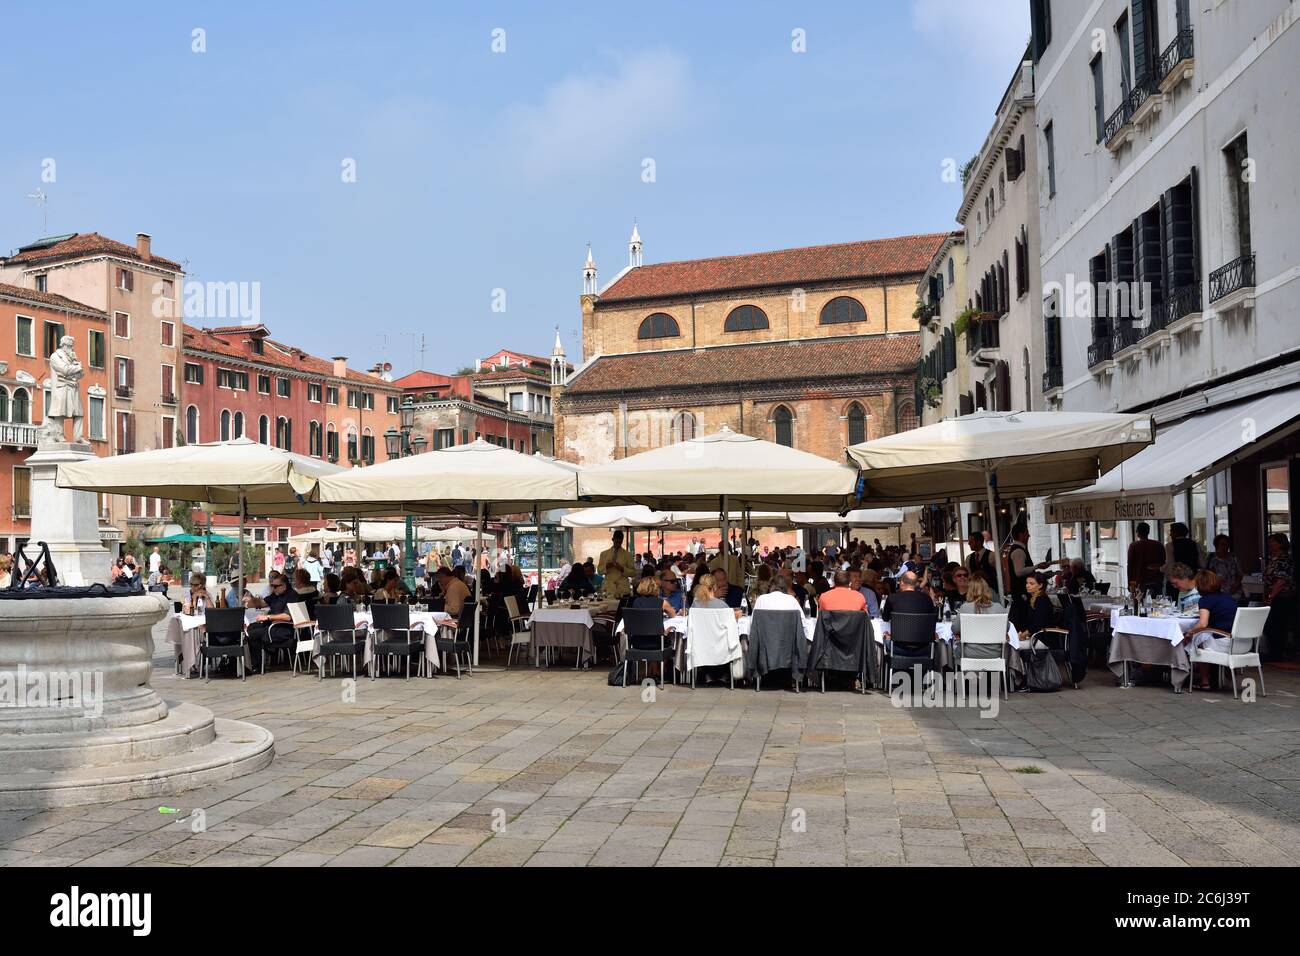 VENICE, ITALY - SEPT 21, 2014: People visit street cafe on square S. Stefano in Venice. This is the typical Venetian cafe Stock Photo